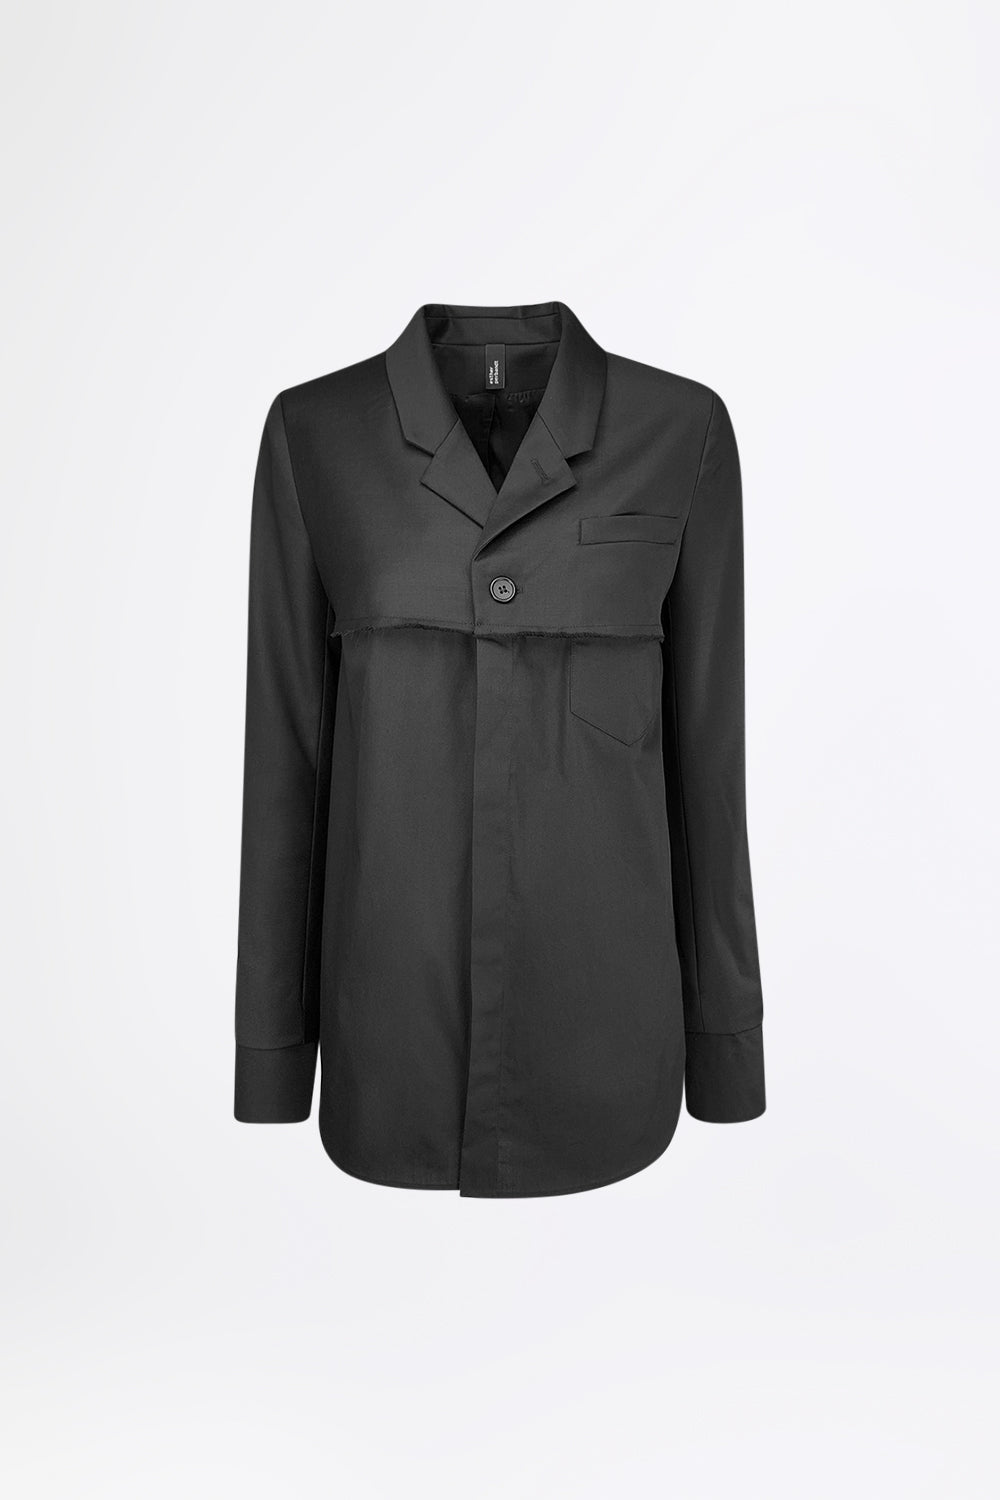 CUTTED - Jacket - Men